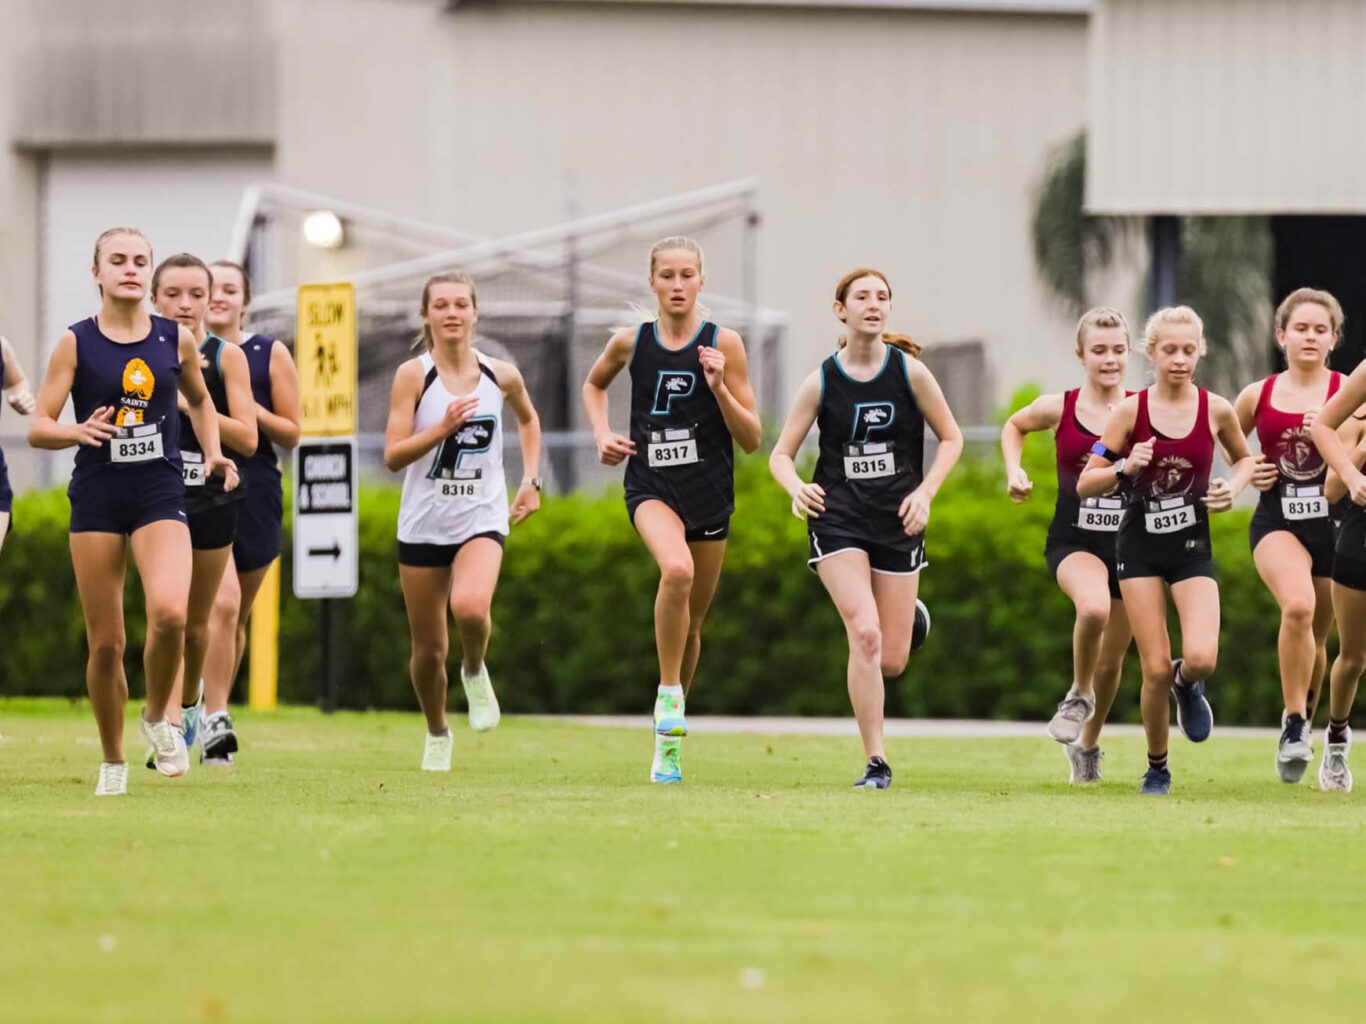 Girls Cross Country: Empowering Growth and Community through Running